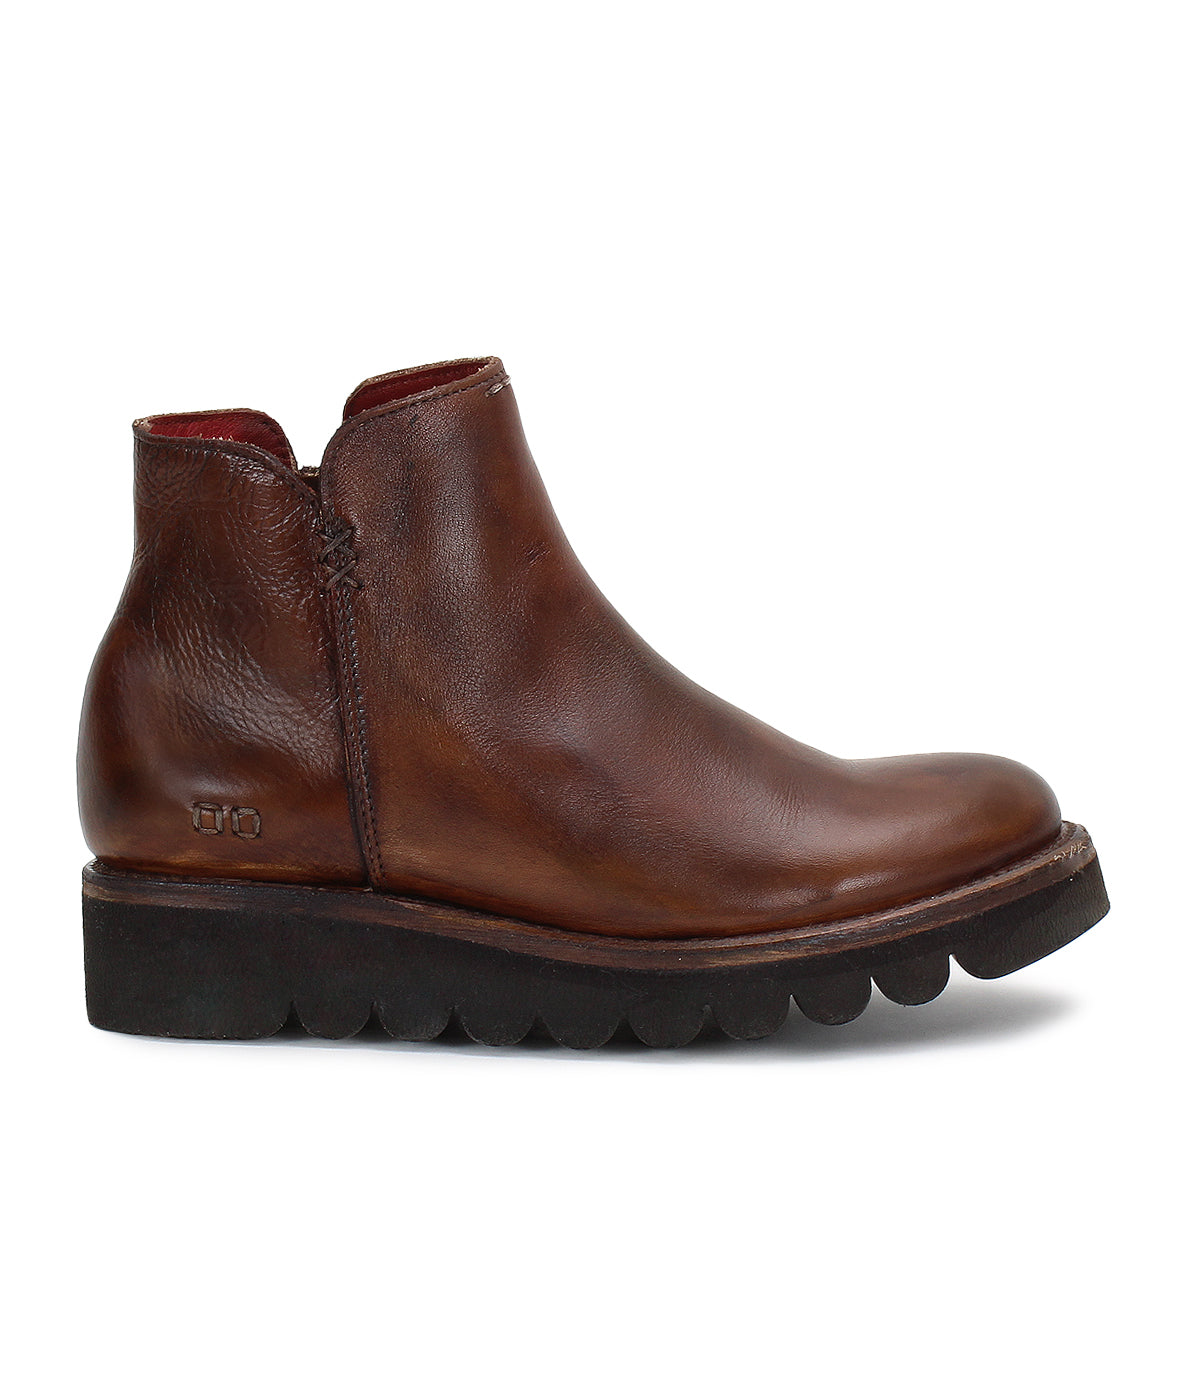 A brown leather Lydyi ankle boot with a zipper on the side by Bed Stu.